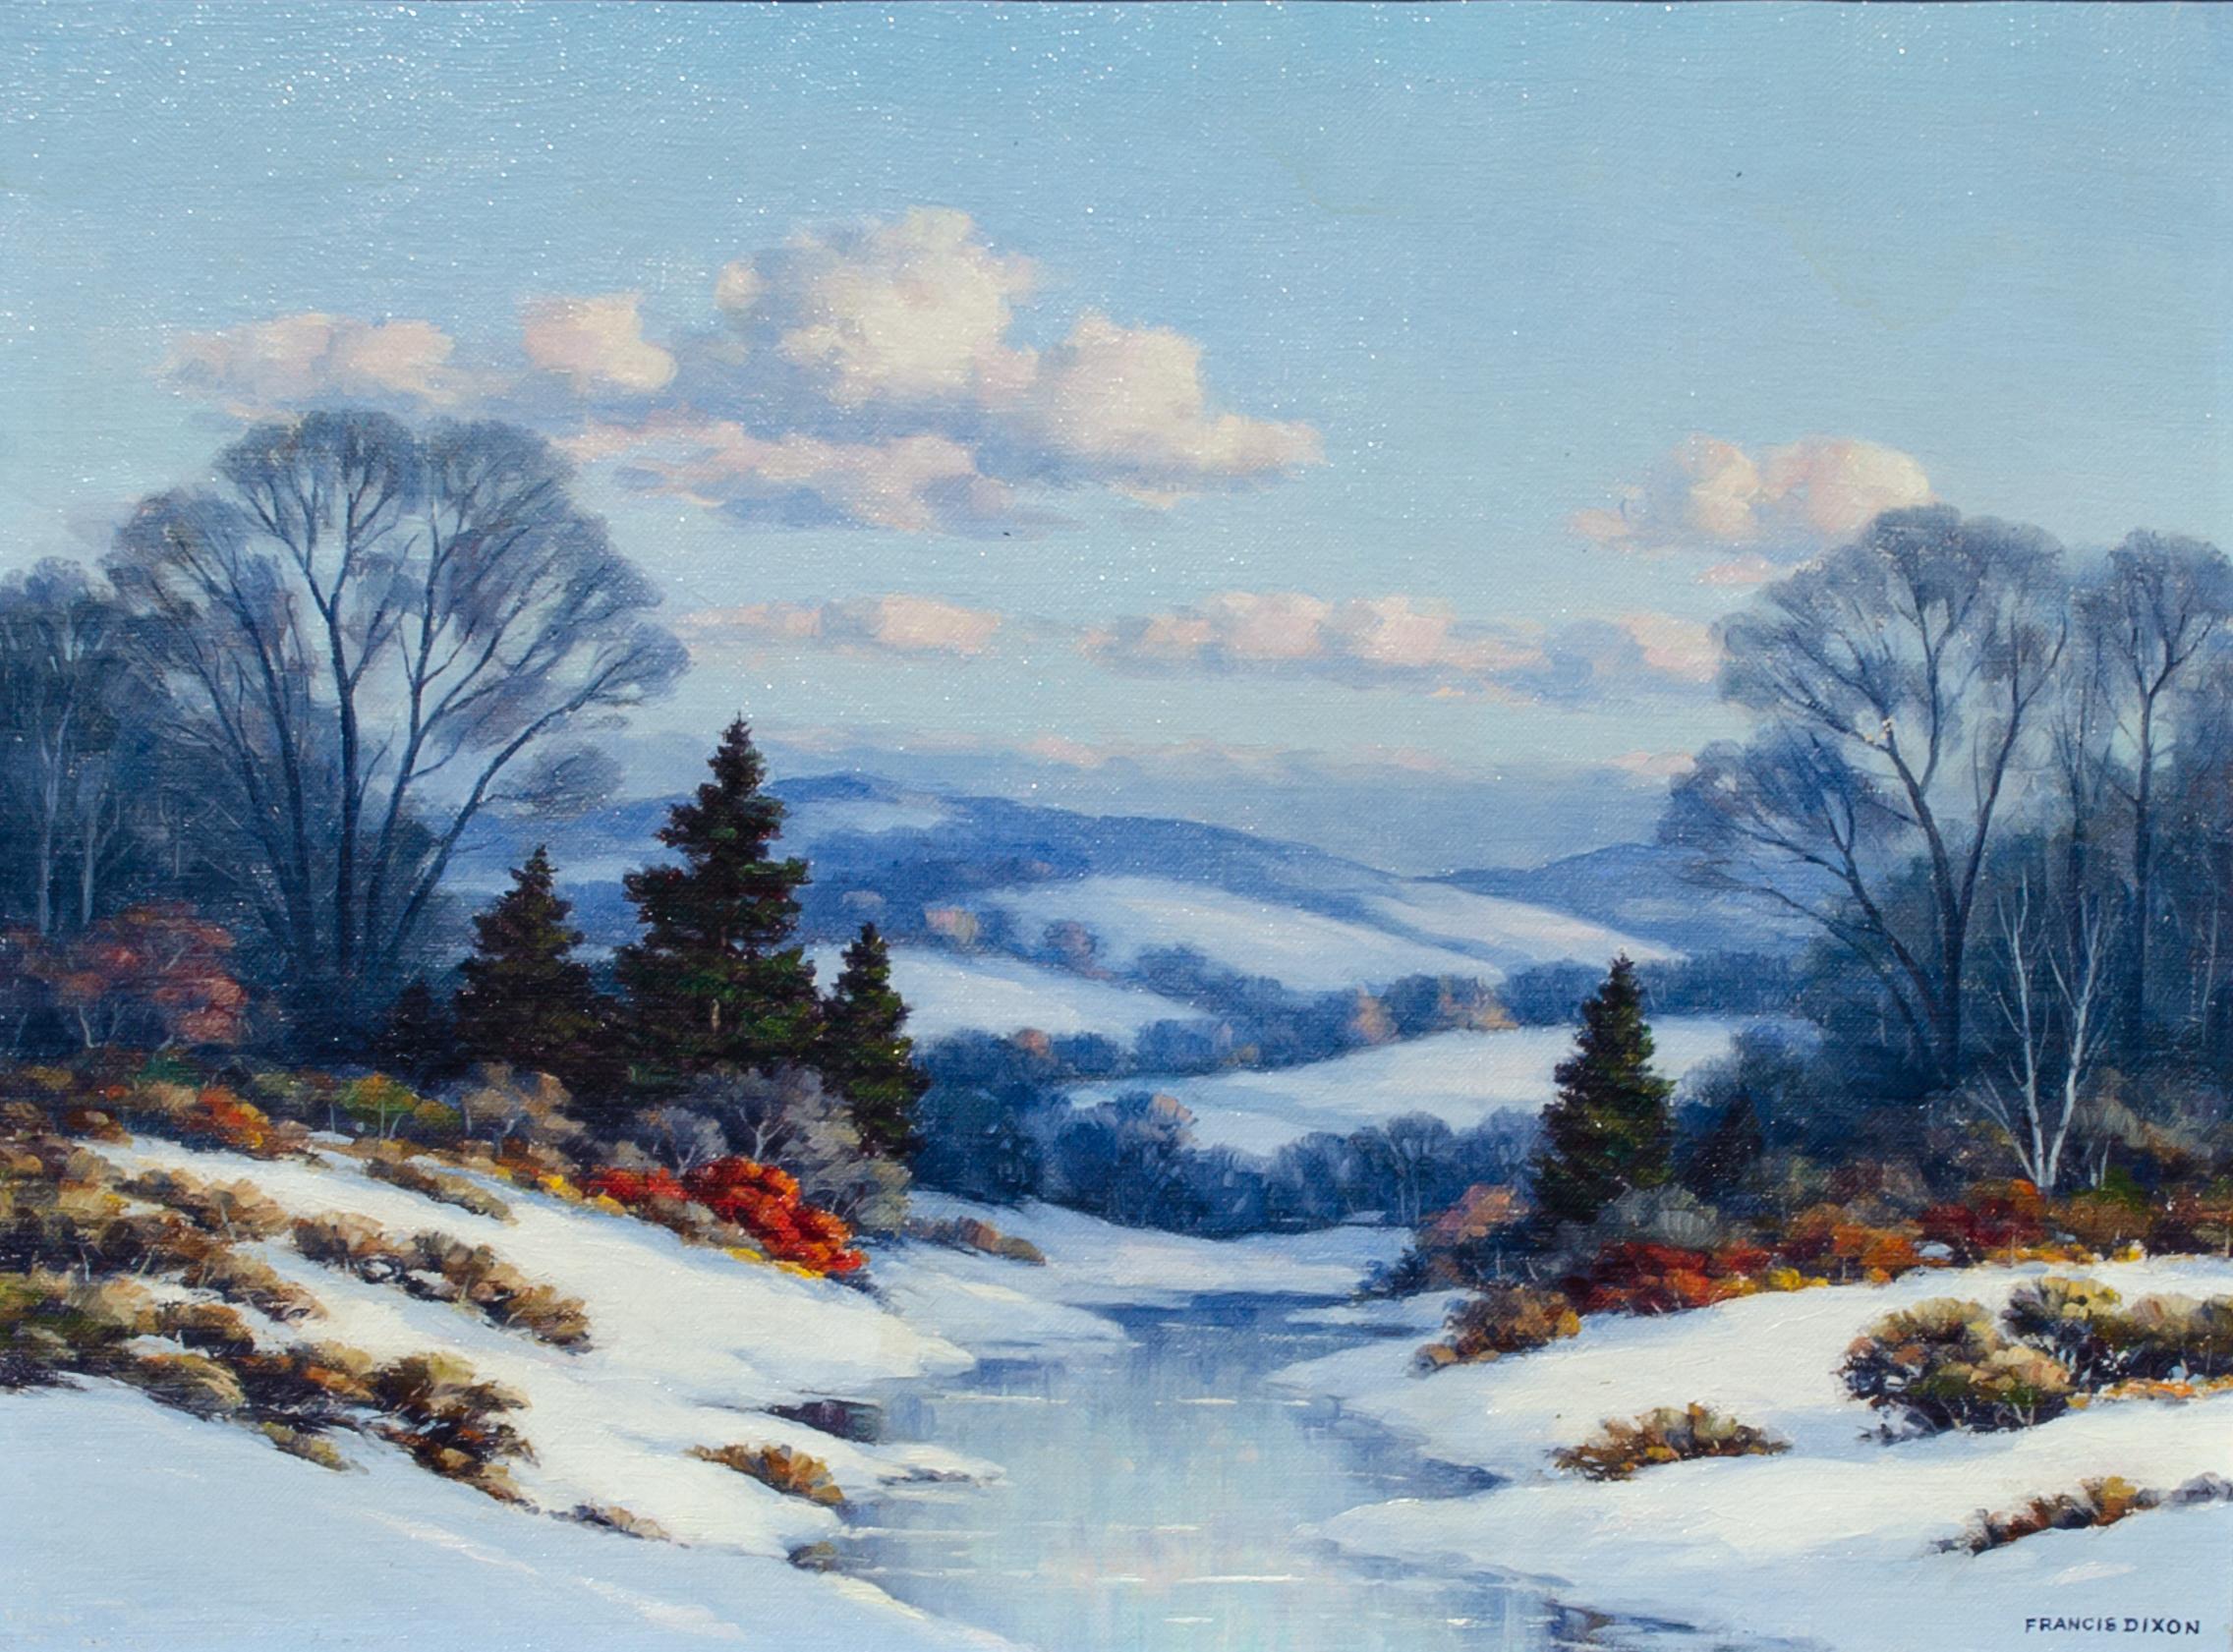 Francis Dixon (American, 1879-1967)
Untitled (Winter Landscape), 20th Century
Oil on canvas
12 1/4 x 16 in.
Framed: 18 5/8 x 22 1/4 x 1 1/2 in.
Signed lower right: Francis Dixon

This particular spot was painted a number of times by Francis Dixon in